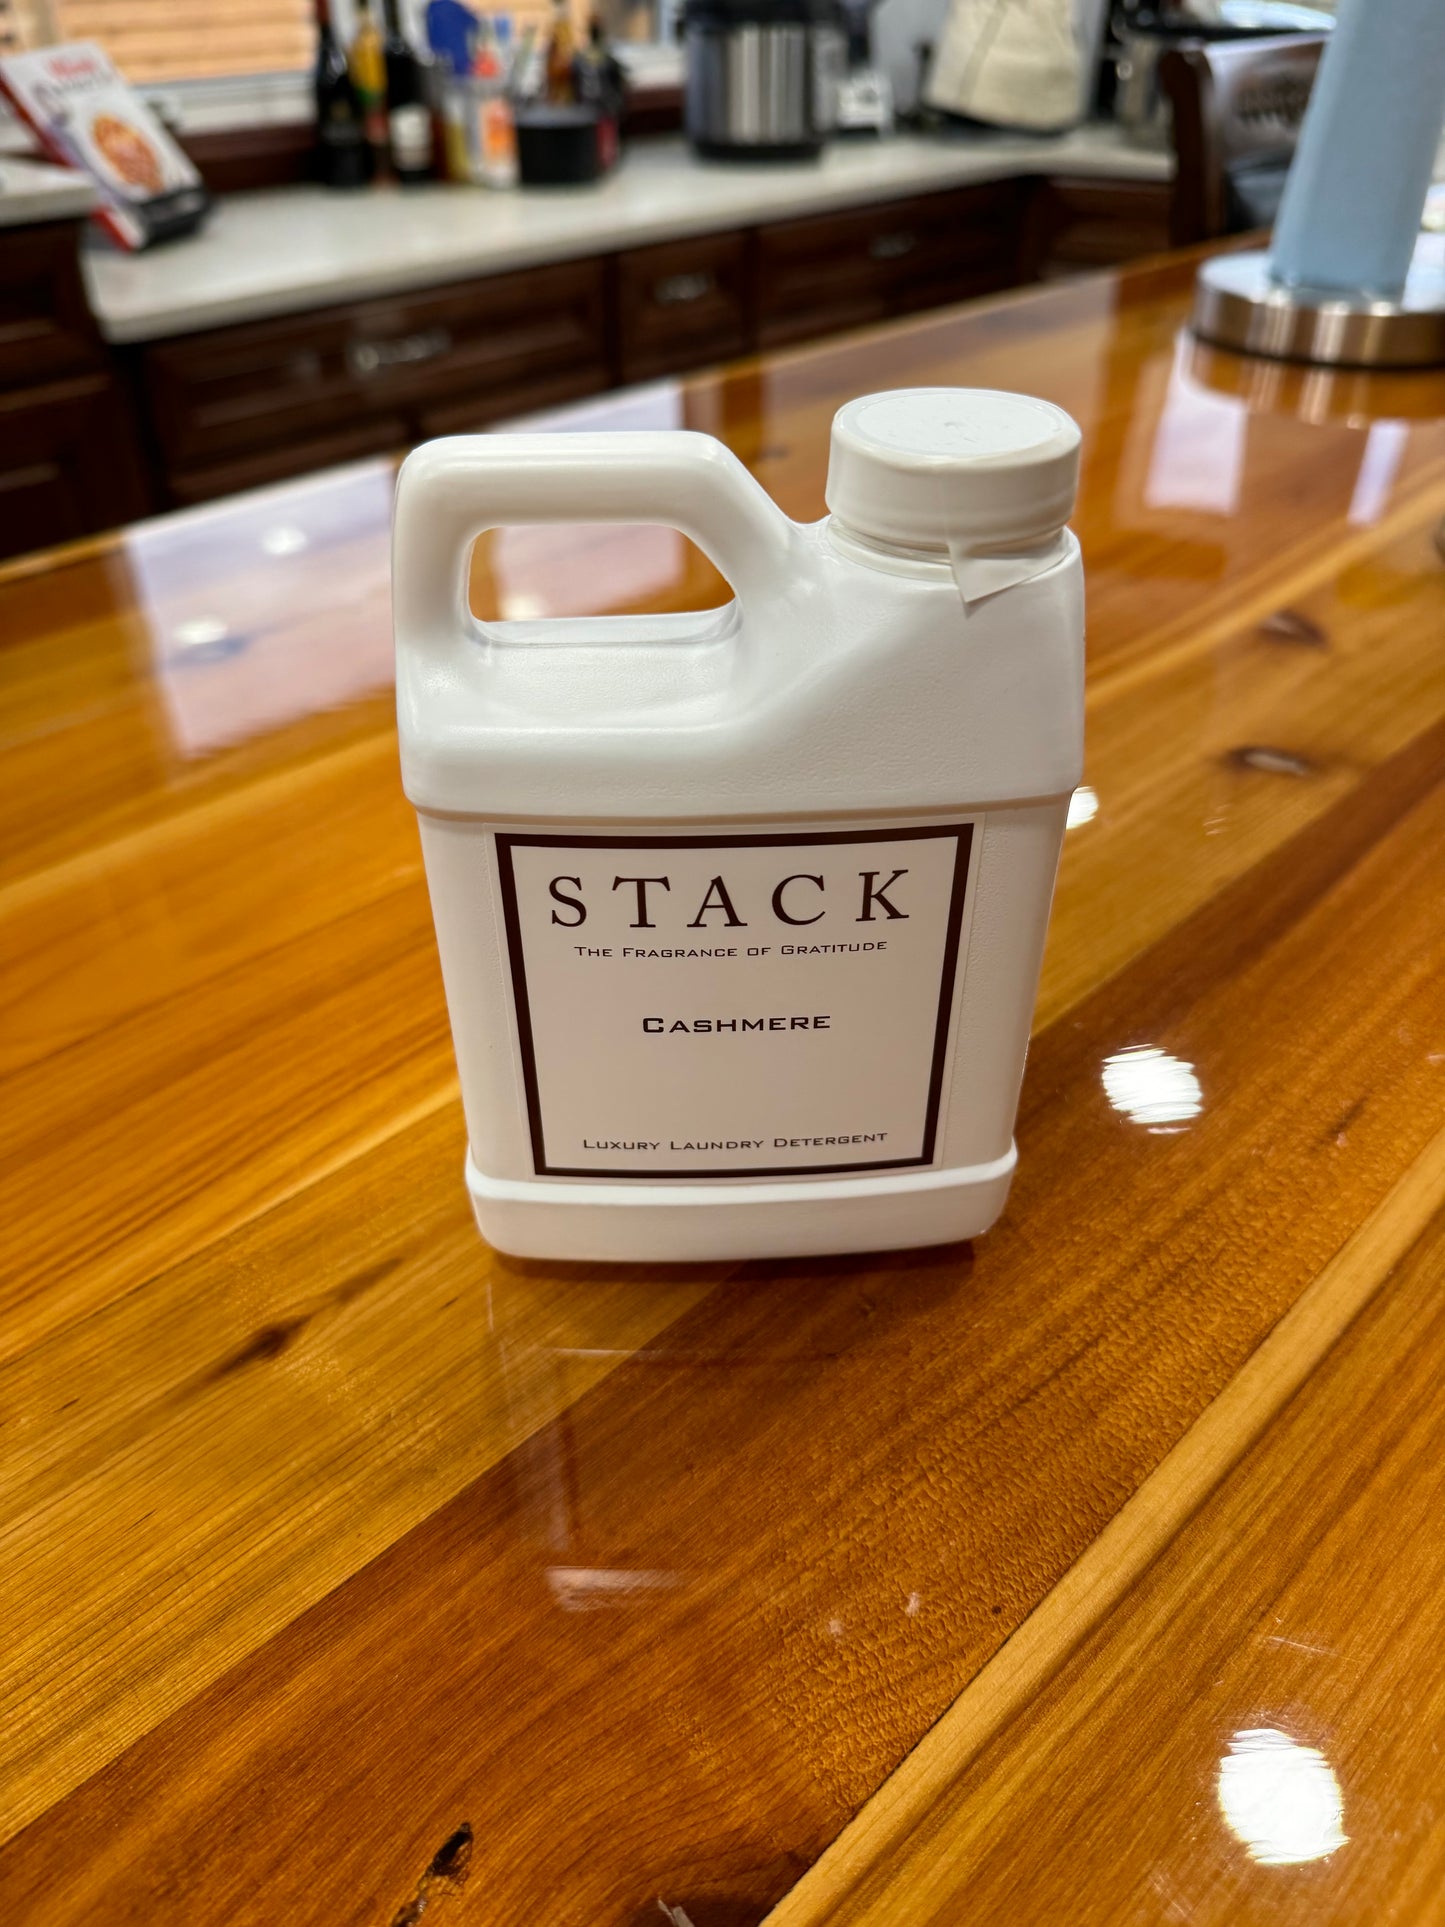 Luxury Laundry Detergent by Stack